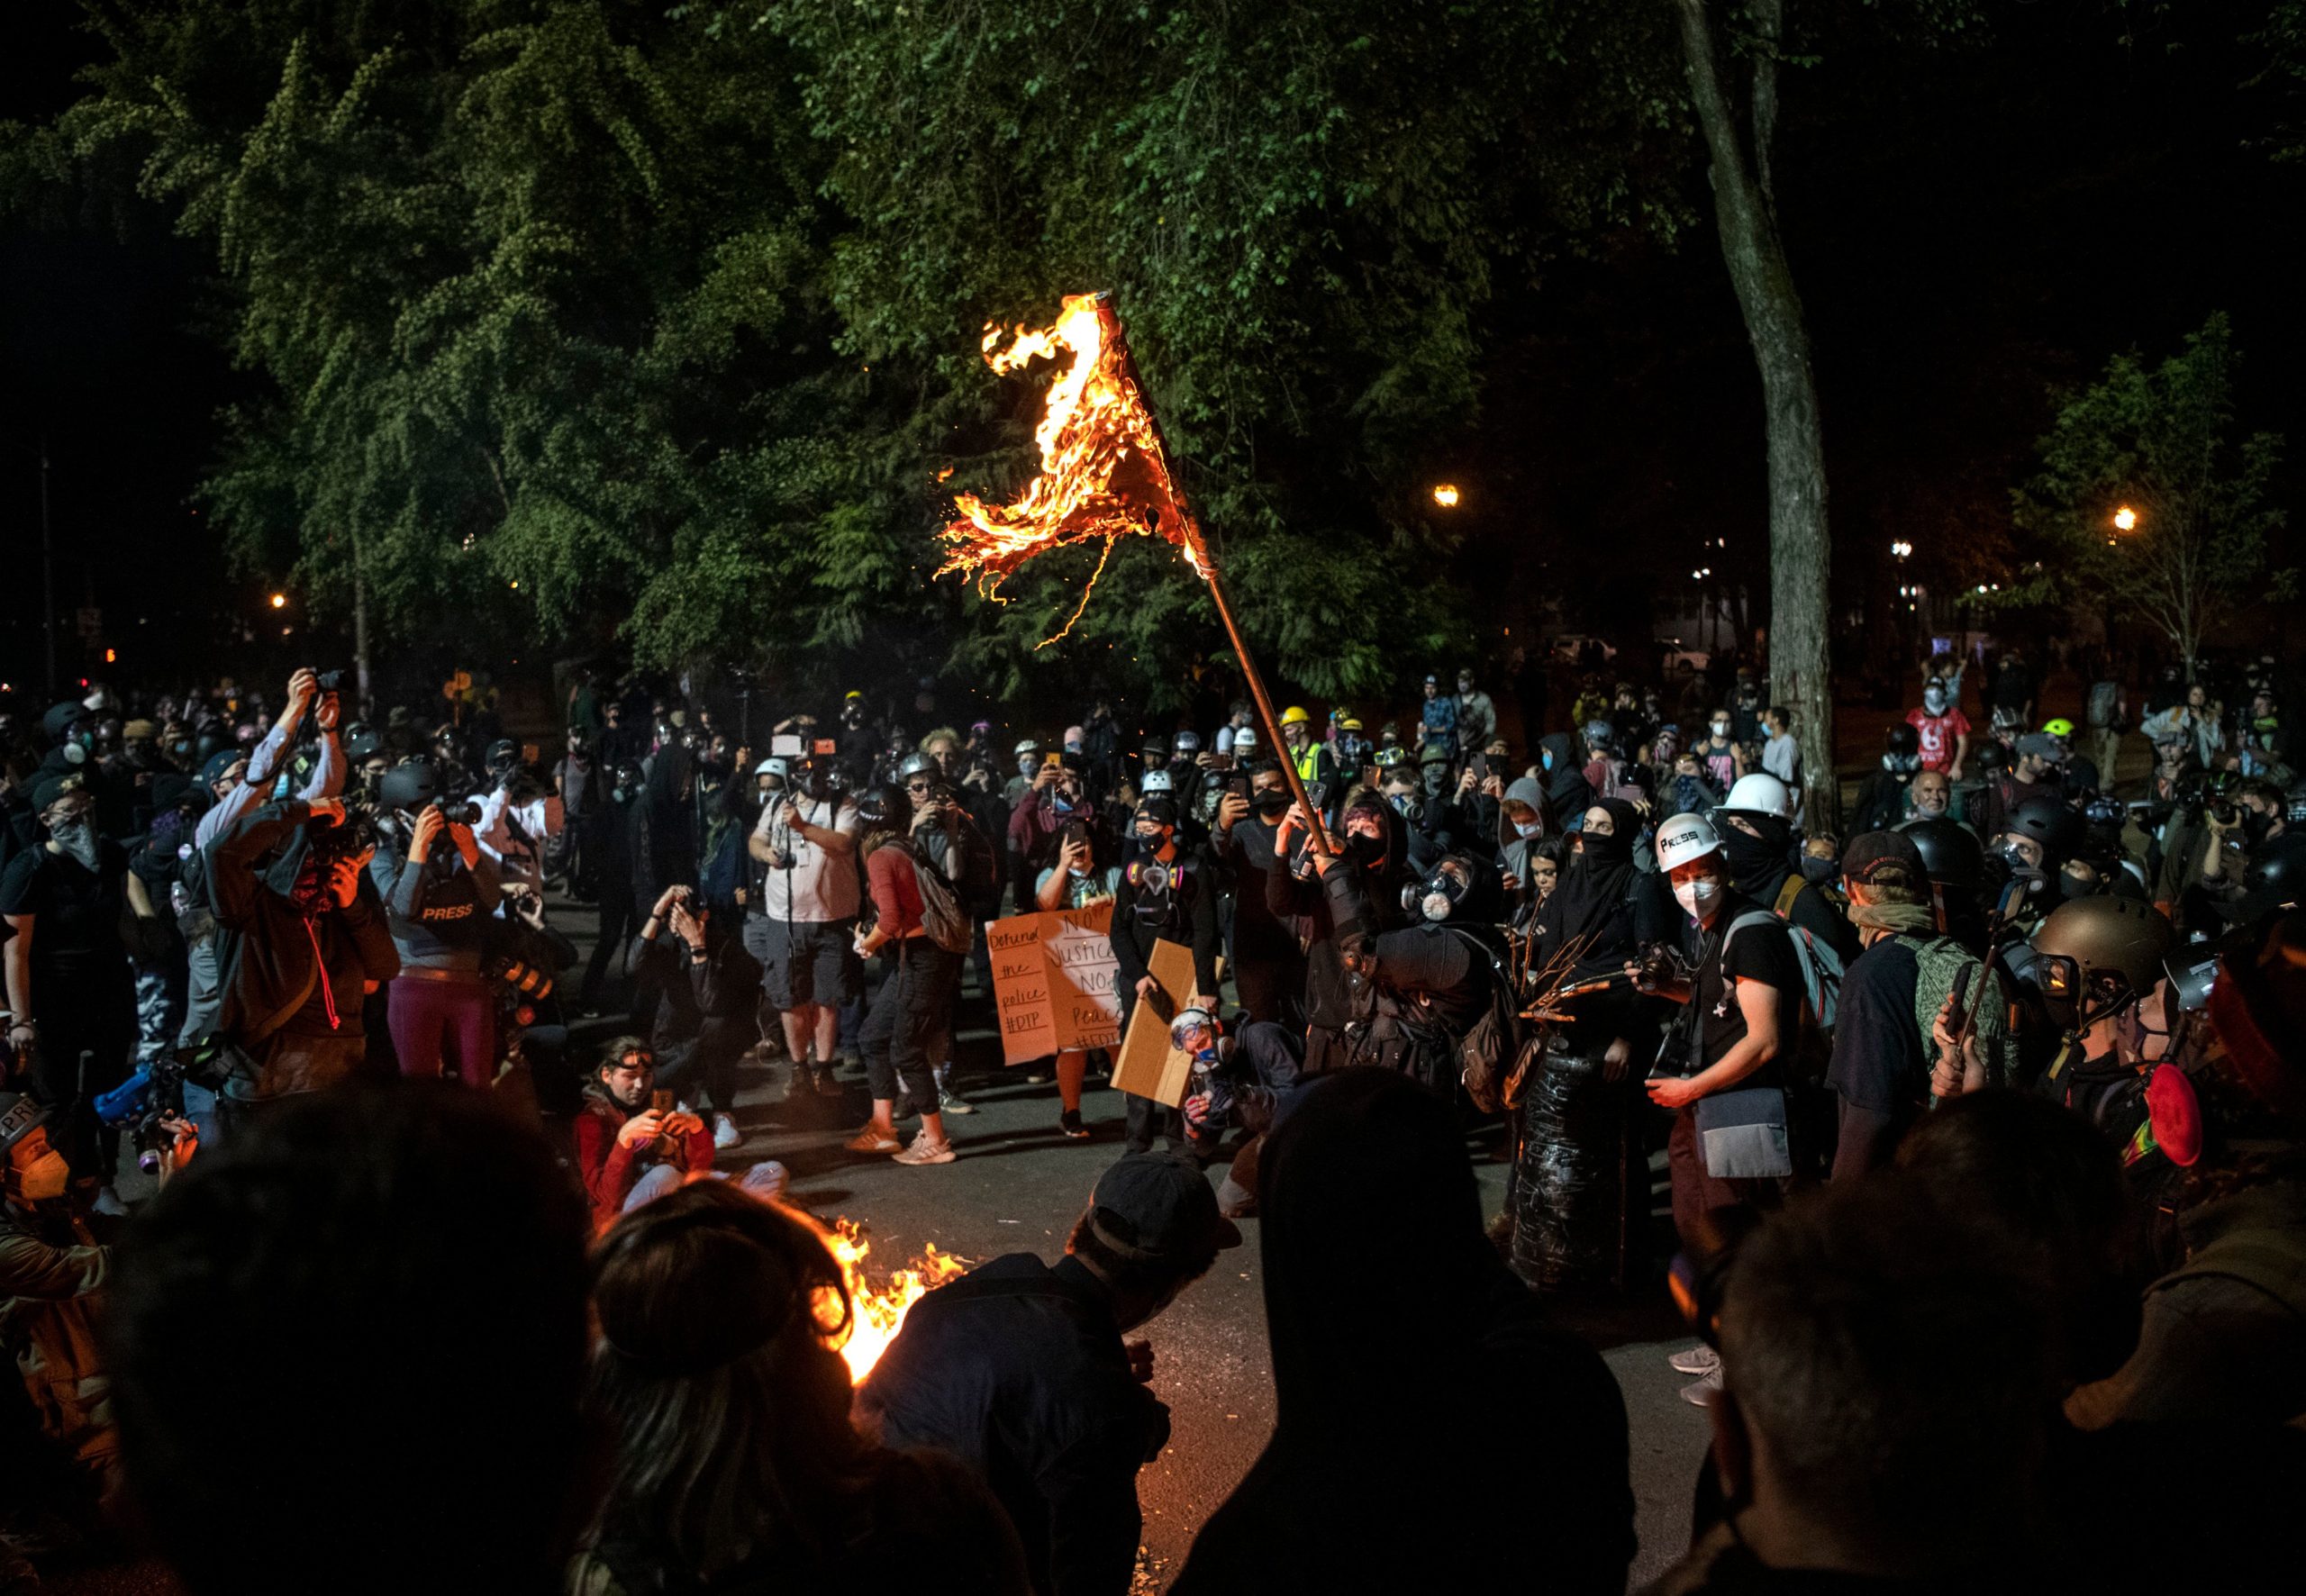 A demonstrator burns an American flag outside the Mark O. Hatfield United States Courthouse late Friday night during the protest on July 31, 2020 in Portland, Oregon. - US federal officers will stay in the protest-wracked city of Portland until local law enforcement officials finish a "cleanup of anarchists and agitators," the US President said. The forces -- whose deployment was seen by many as part of the president's law-and-order strategy for re-election and exacerbated tensions between authorities and anti-racism protestors -- had been scheduled to begin their phased pullout from Portland on July 30. Law enforcement did not engage with the demonstration on Friday night. (Photo by Alisha JUCEVIC / AFP) (Photo by ALISHA JUCEVIC/AFP via Getty Images)